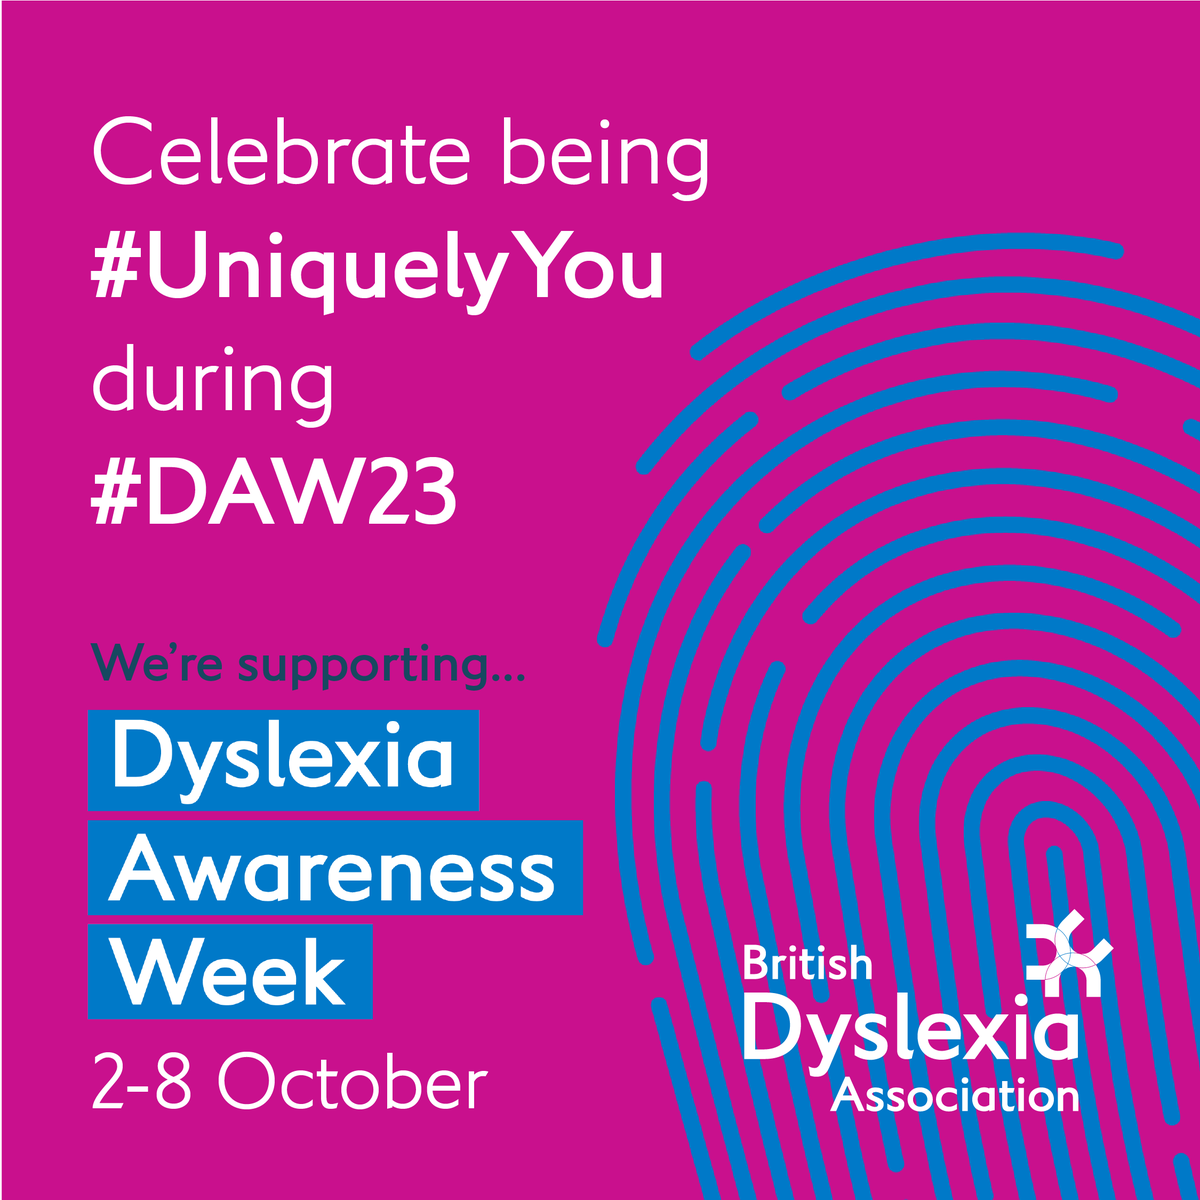 Dyslexia Awareness Week 2023. This Dyslexia Awareness Week we’re celebrating that we are all unique. The #DAW23 theme is #UniquelyYou and if you want to find out more about dyslexia, click the link bit.ly/3KjysTj